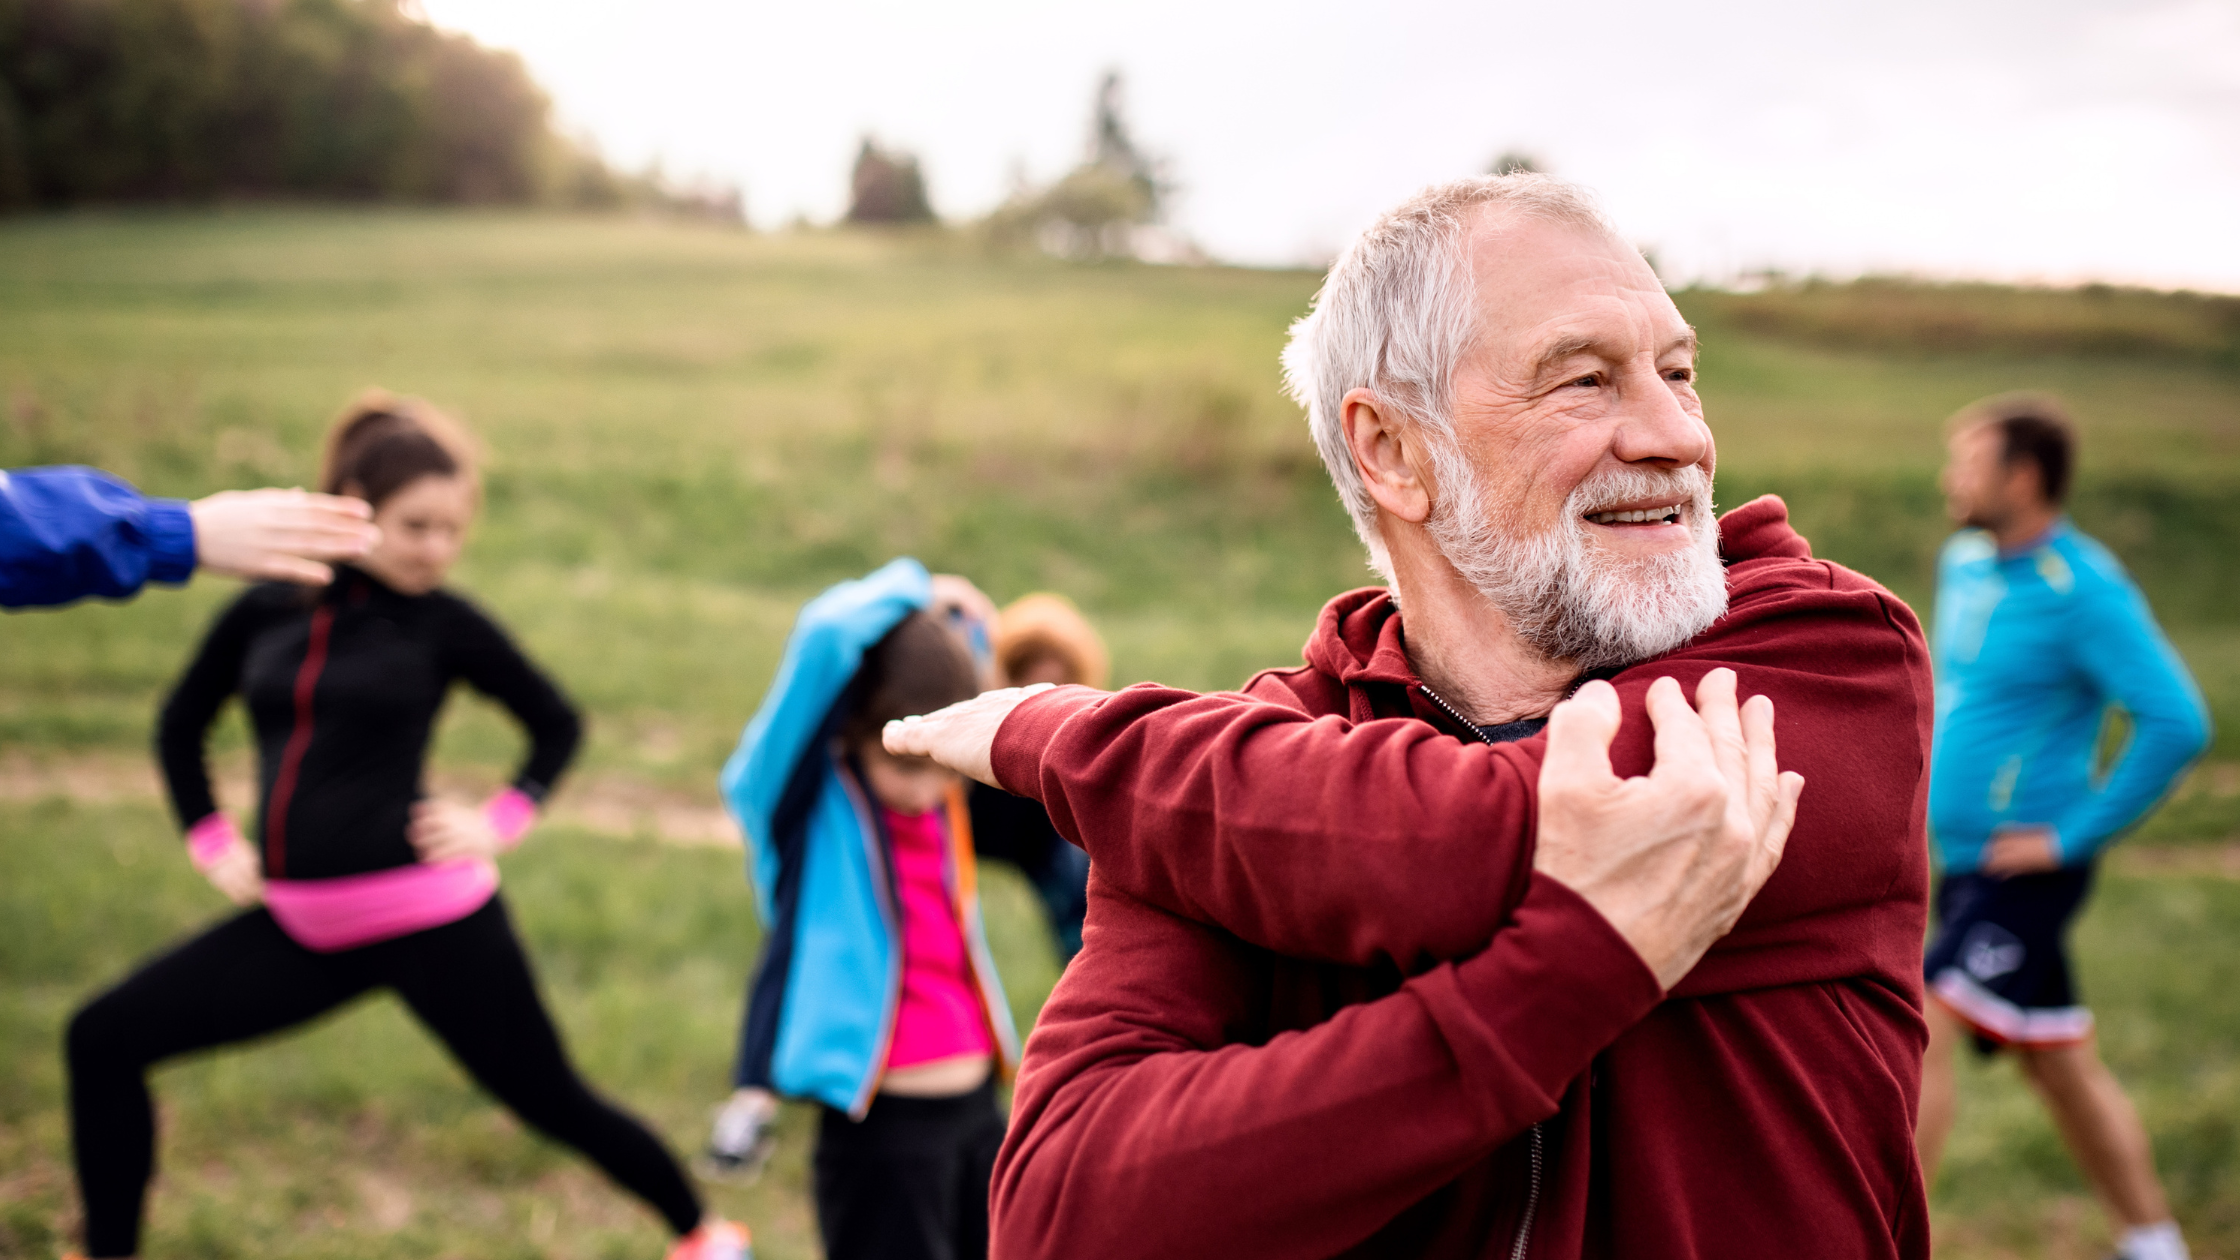 Three Top Health Tips for Adults in Their 50s and Beyond